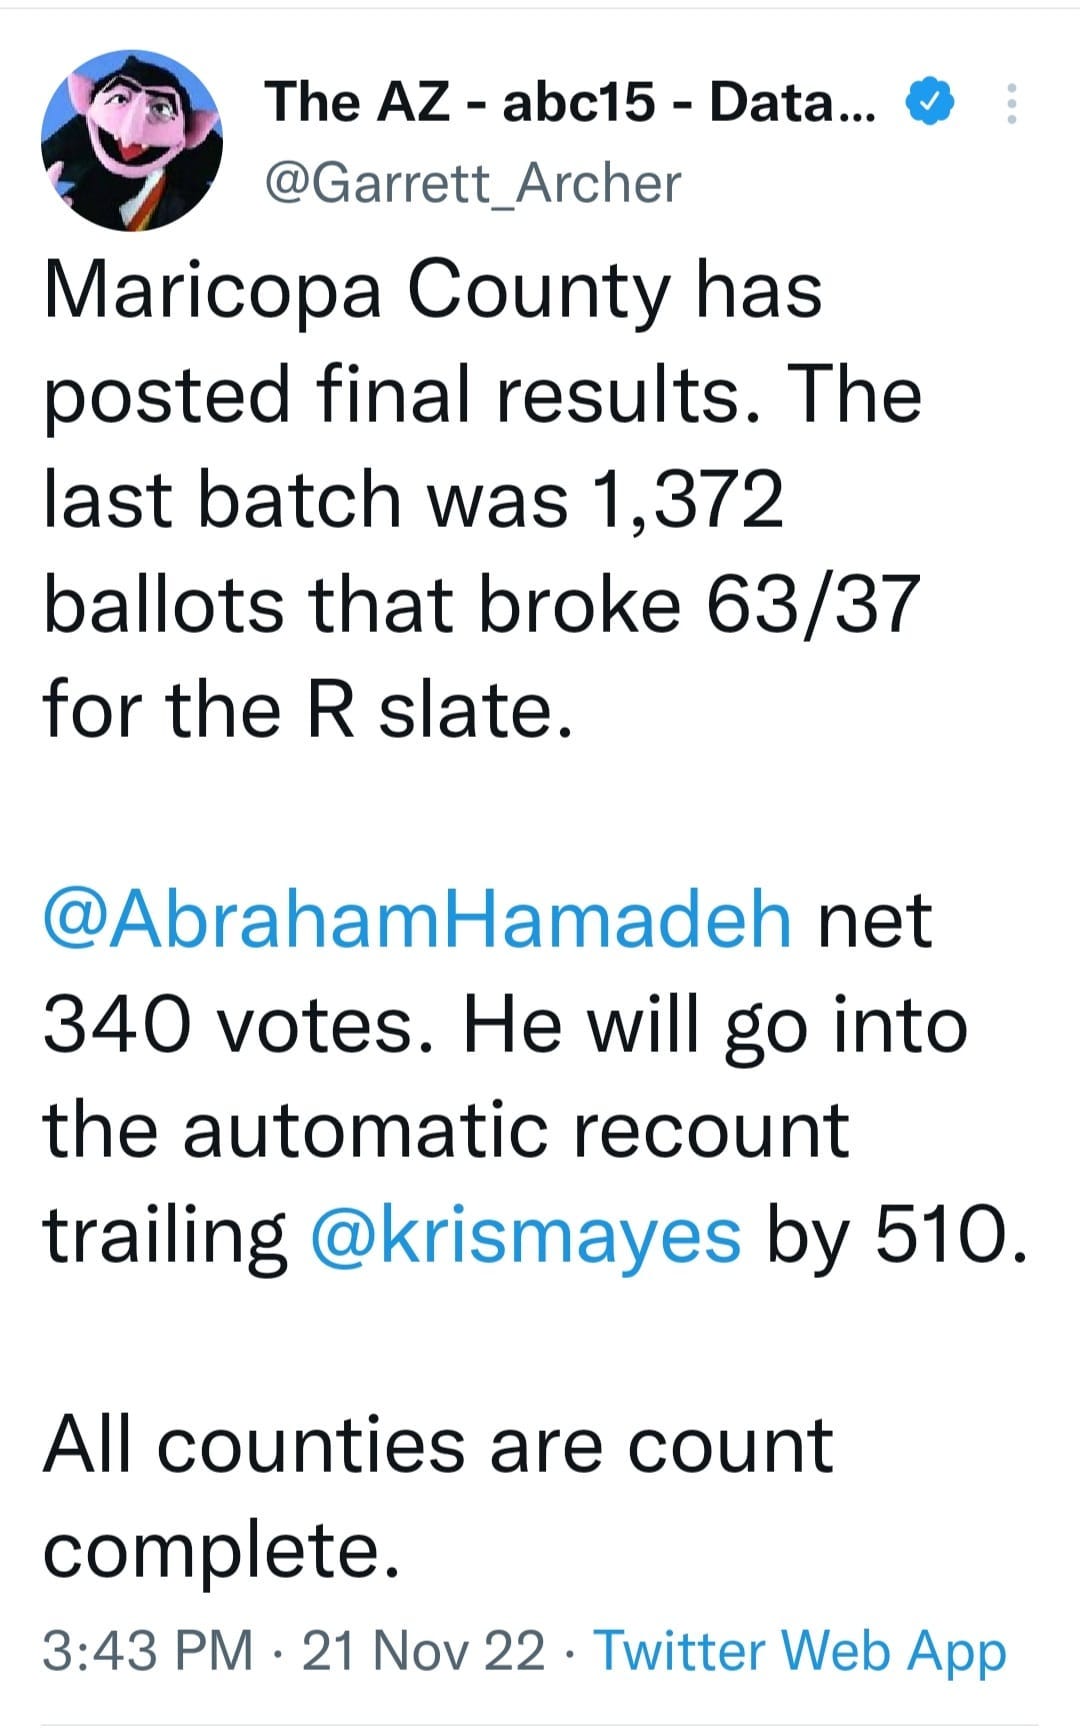 May be a Twitter screenshot of 1 person and text that says 'The AZ- abc15 Data... @Garrett_Archer Maricopa County has posted final results. The last batch was 1,372 ballots that broke 63/37 for the R slate. @AbrahamHamadeh net 340 votes. He He will go into the automatic recount trailing @krismayes by 510. All counties are count complete. 3:43 PM 21 Nov 22 Twitter Web App'